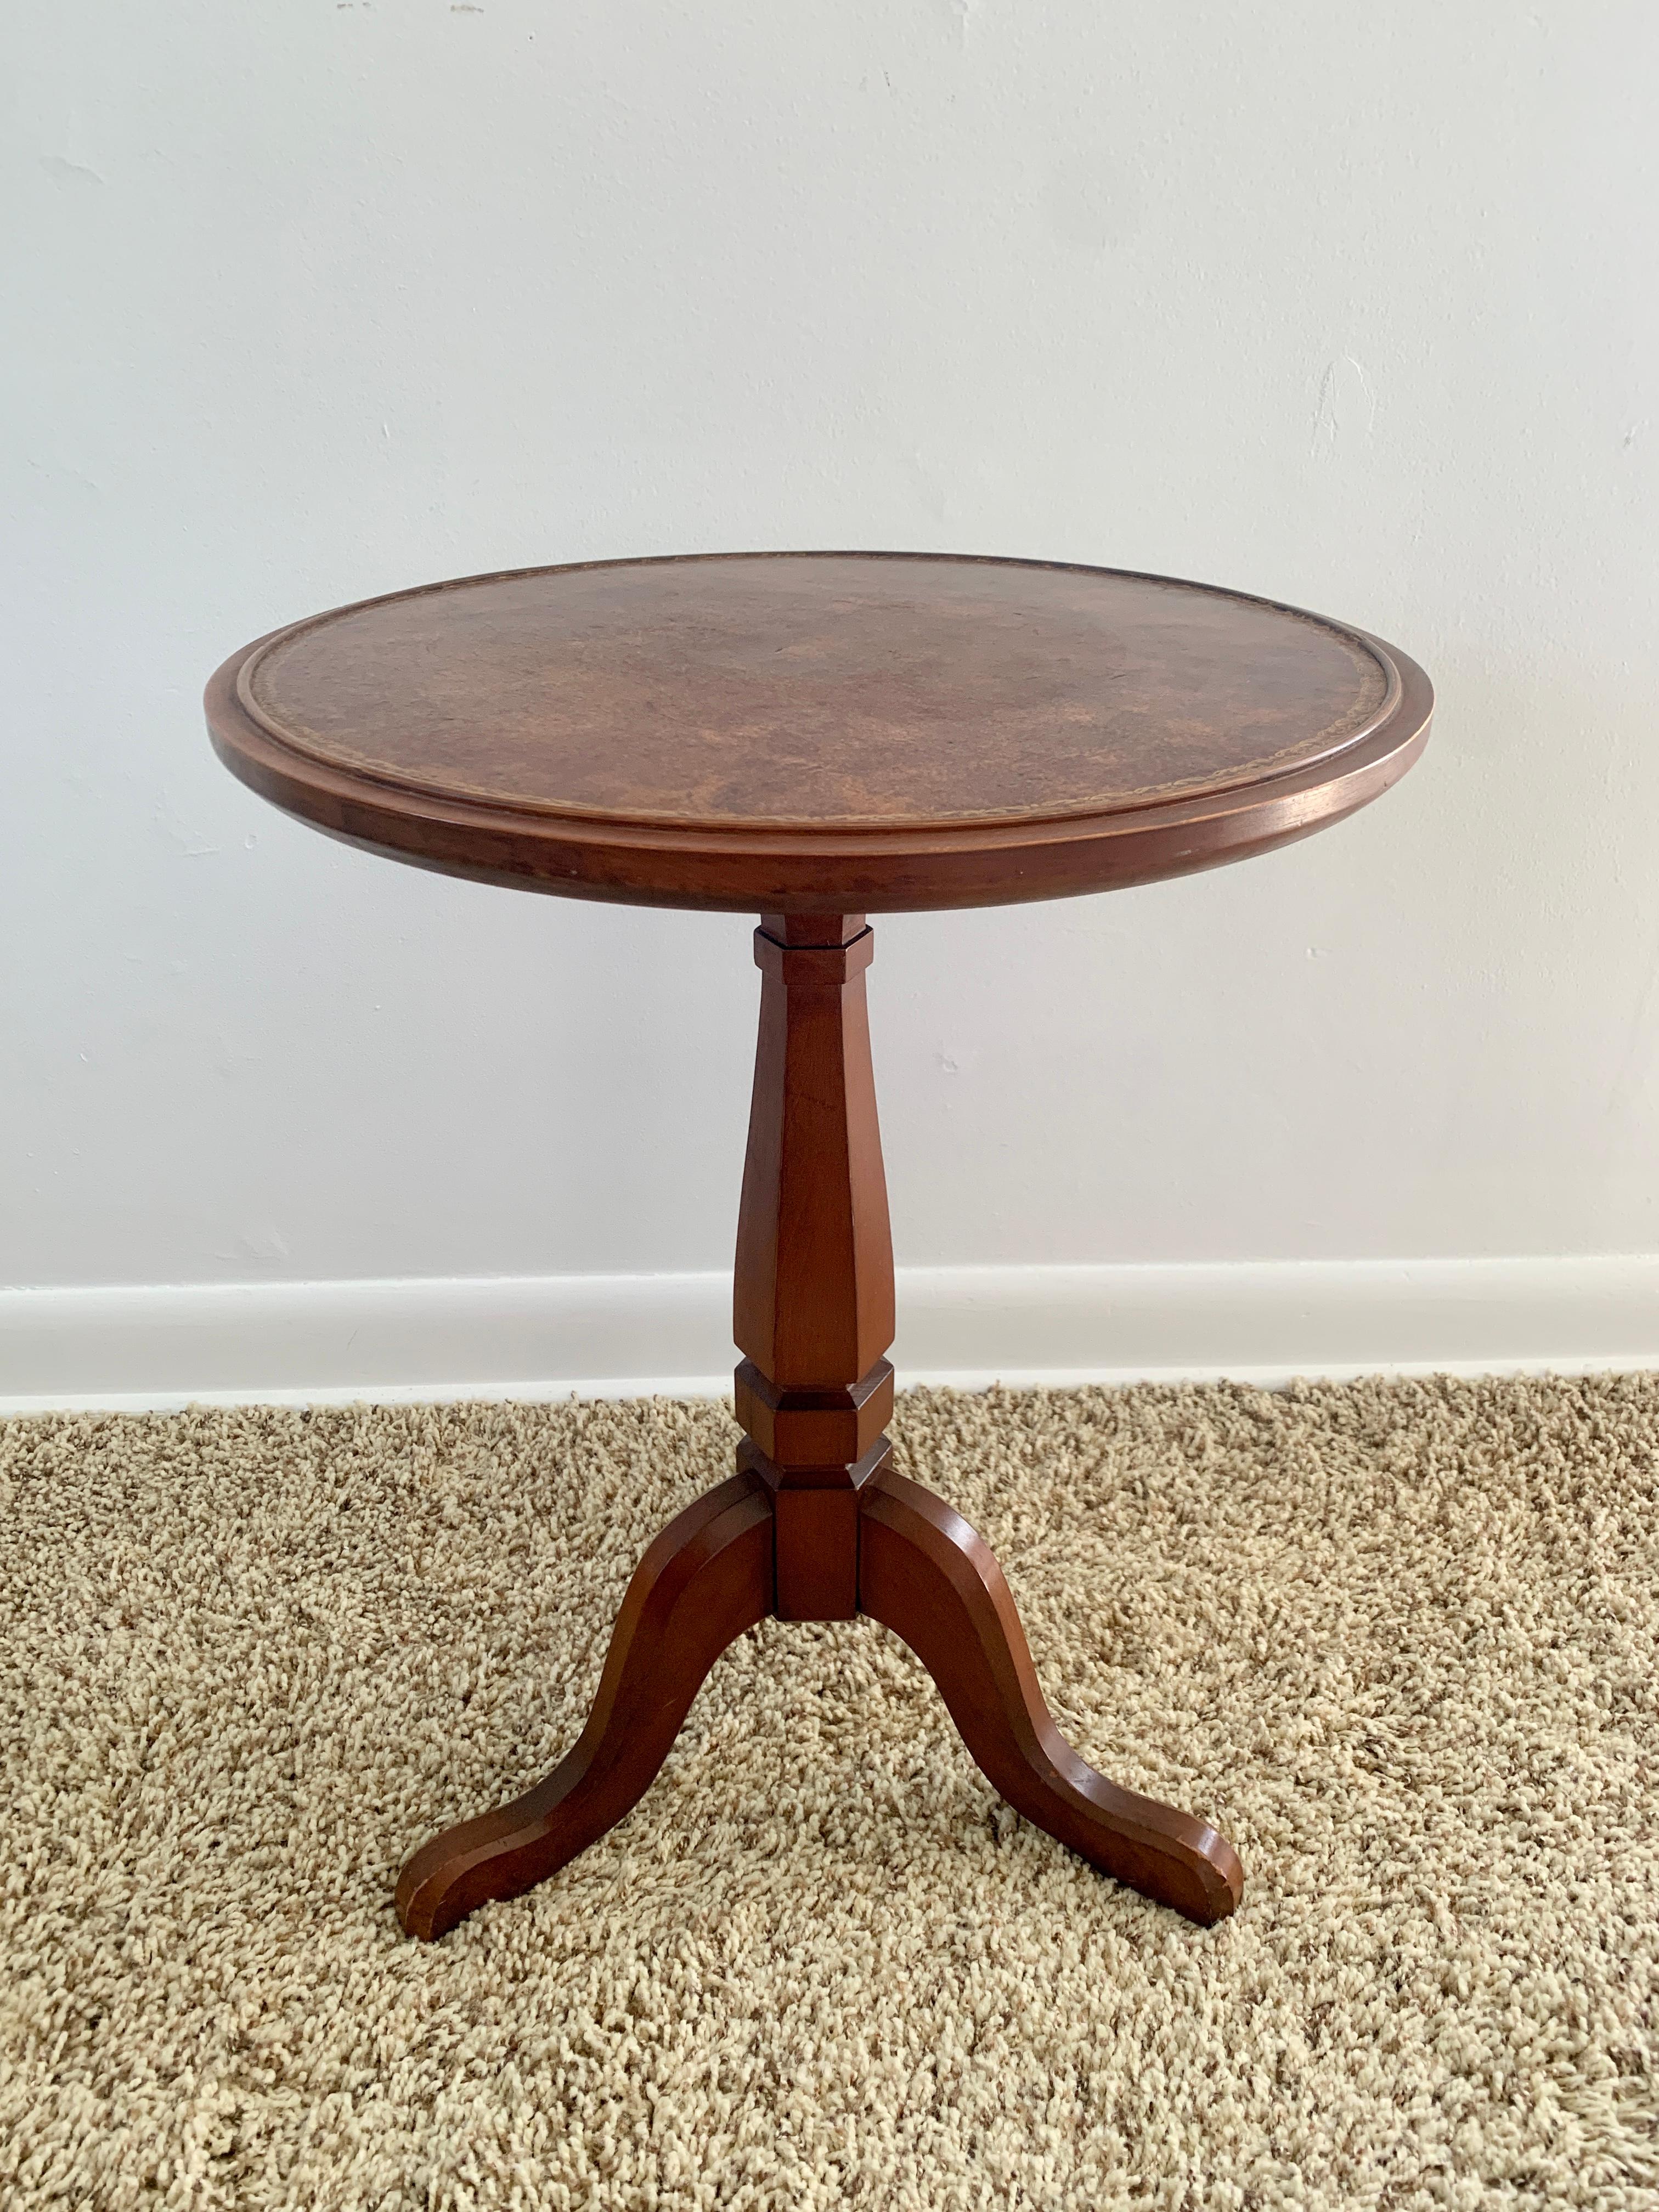 Vintage Georgian Embossed Leather Top Cherry Wood Round Side Table For Sale 2